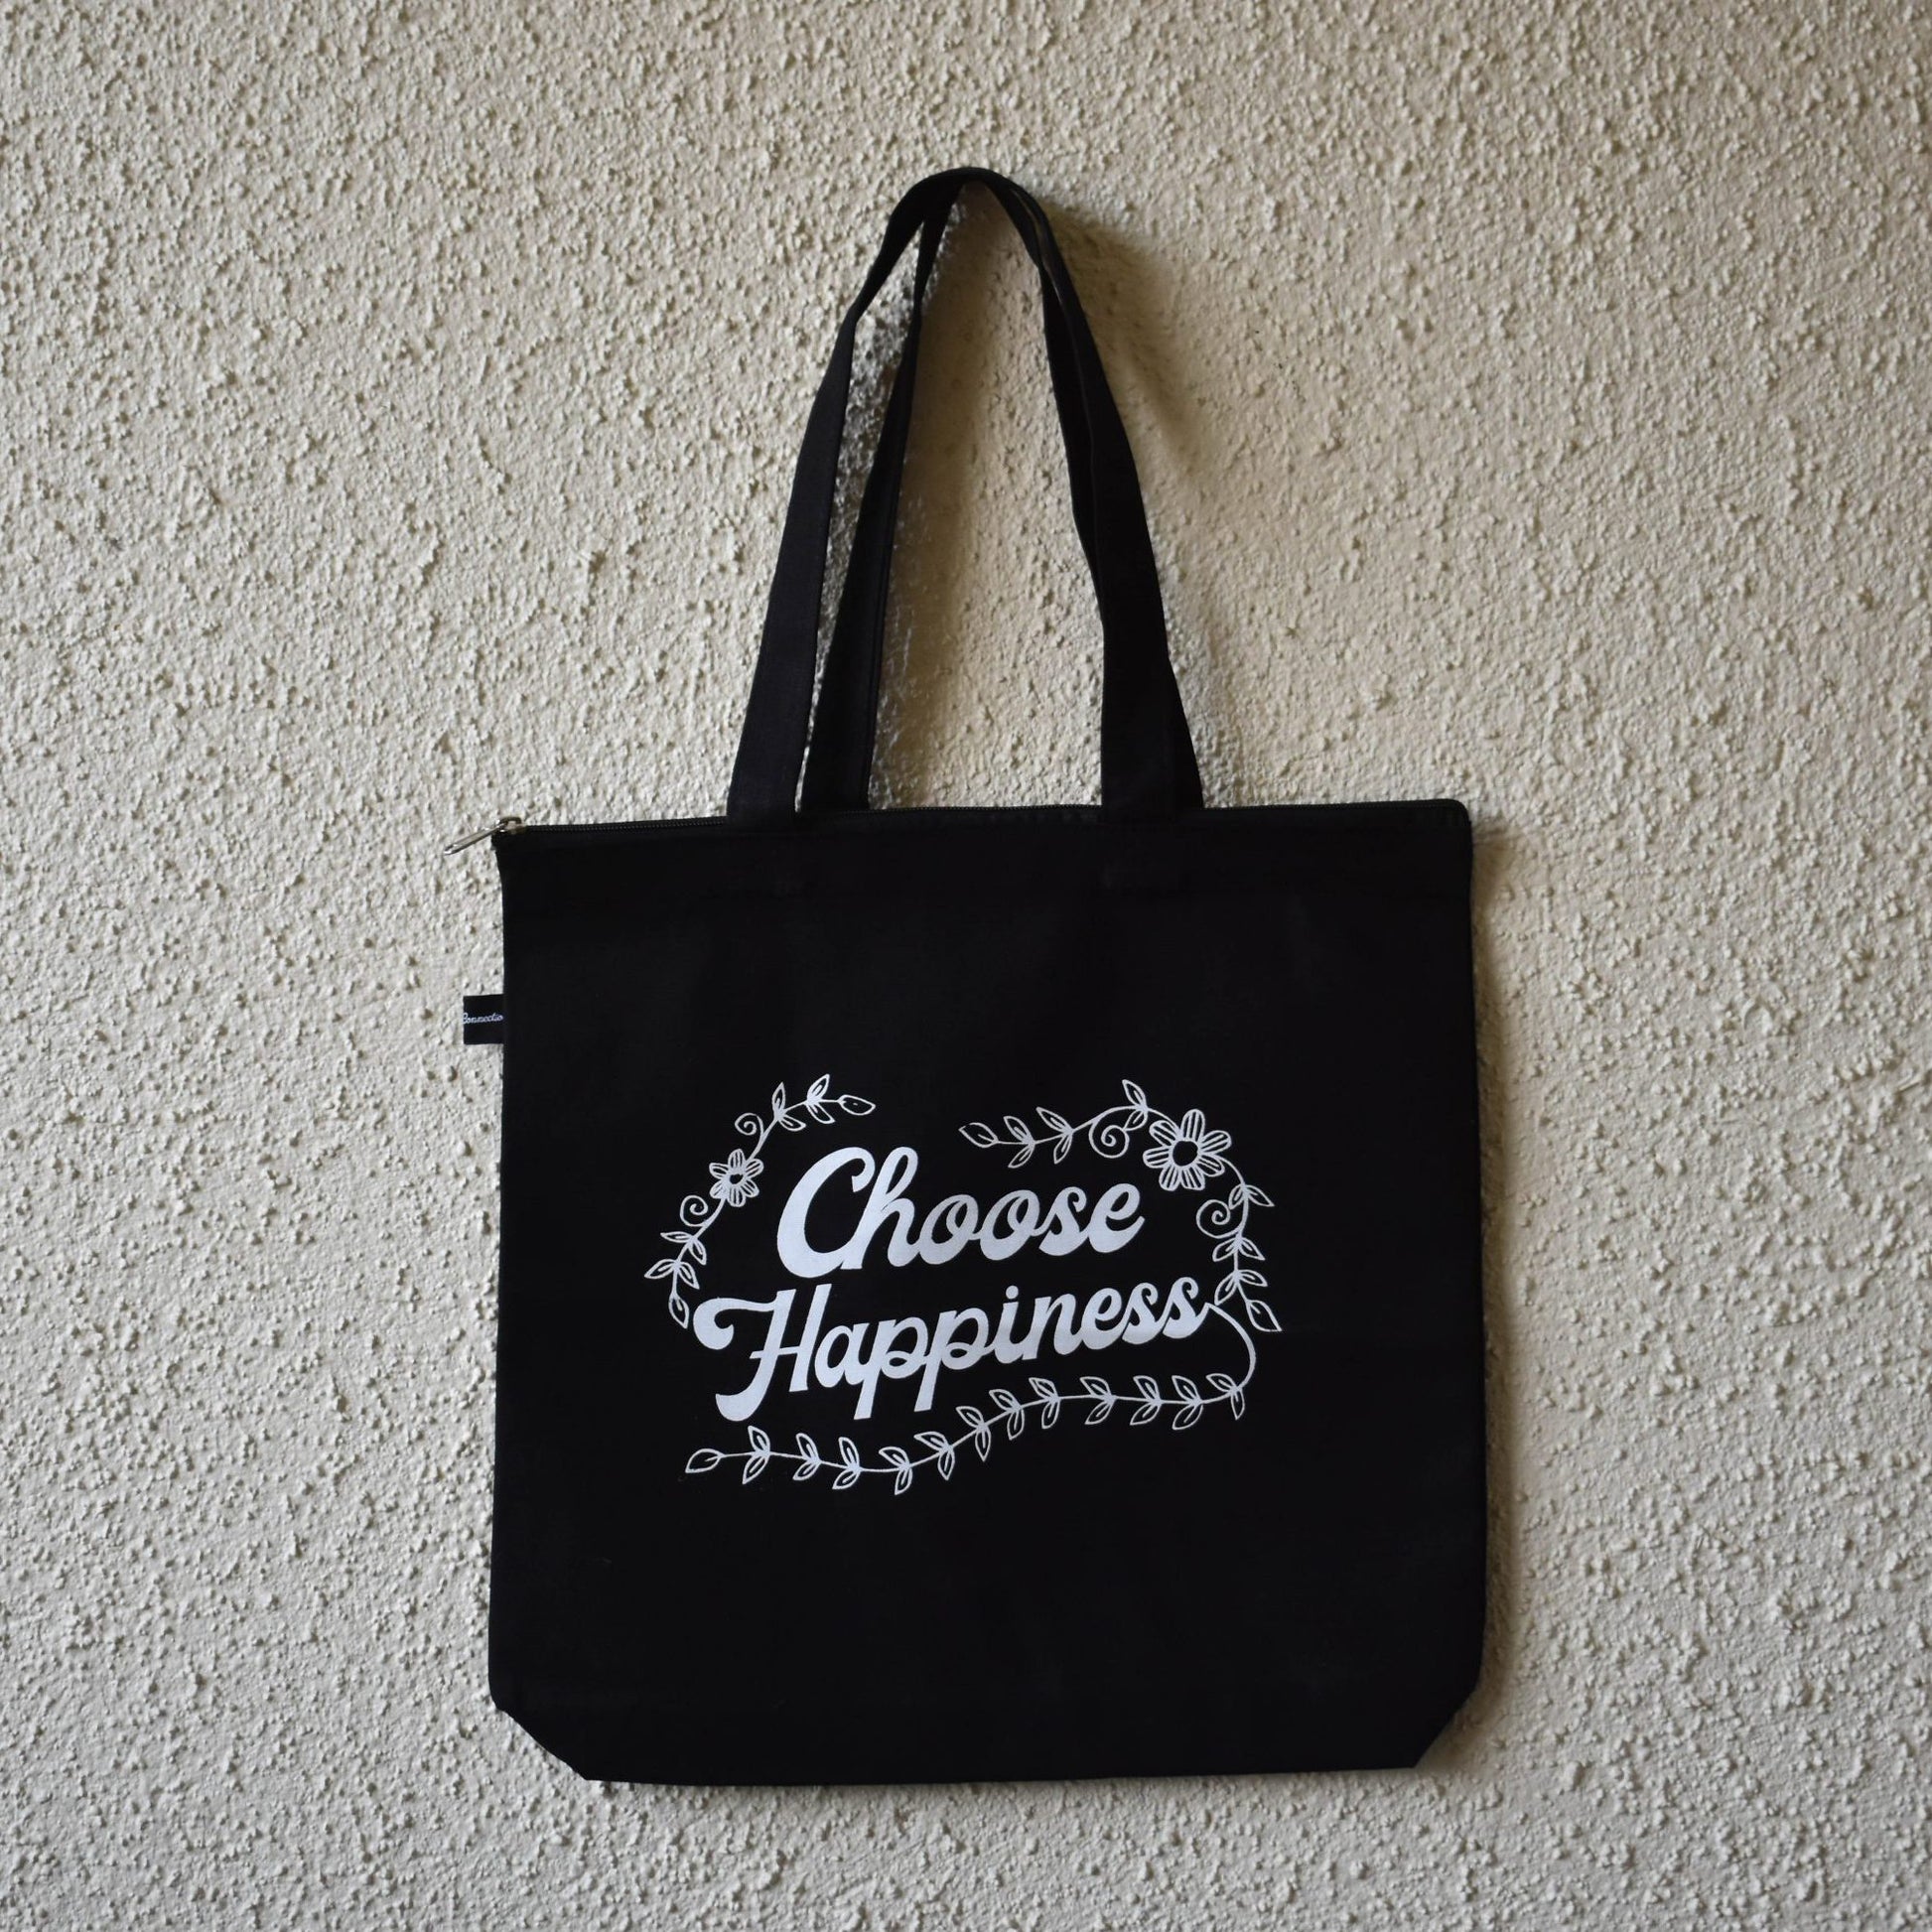 Choose Happiness black canvas tote